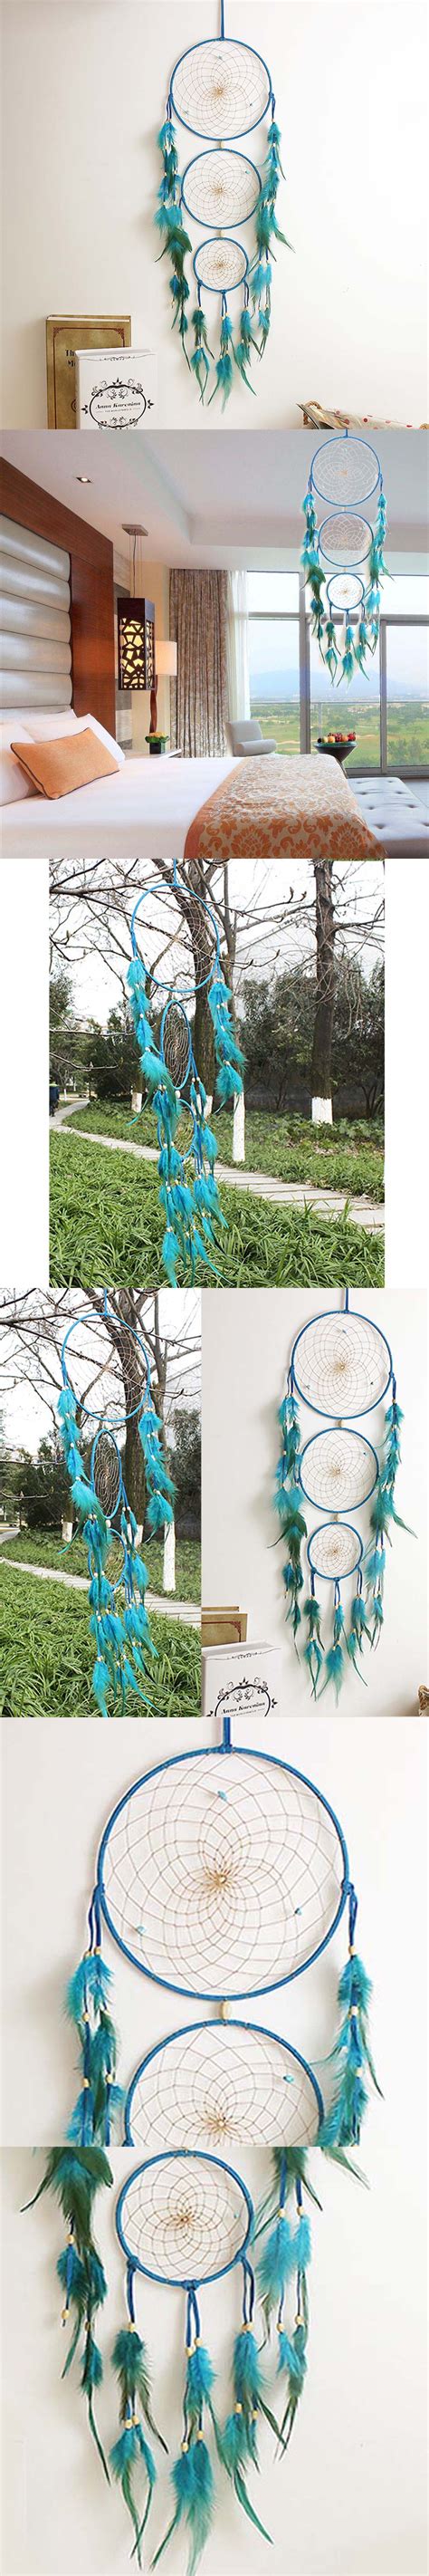 New Fashion Wind Chimes Indian Style Feather Pendant Dream Catcher T